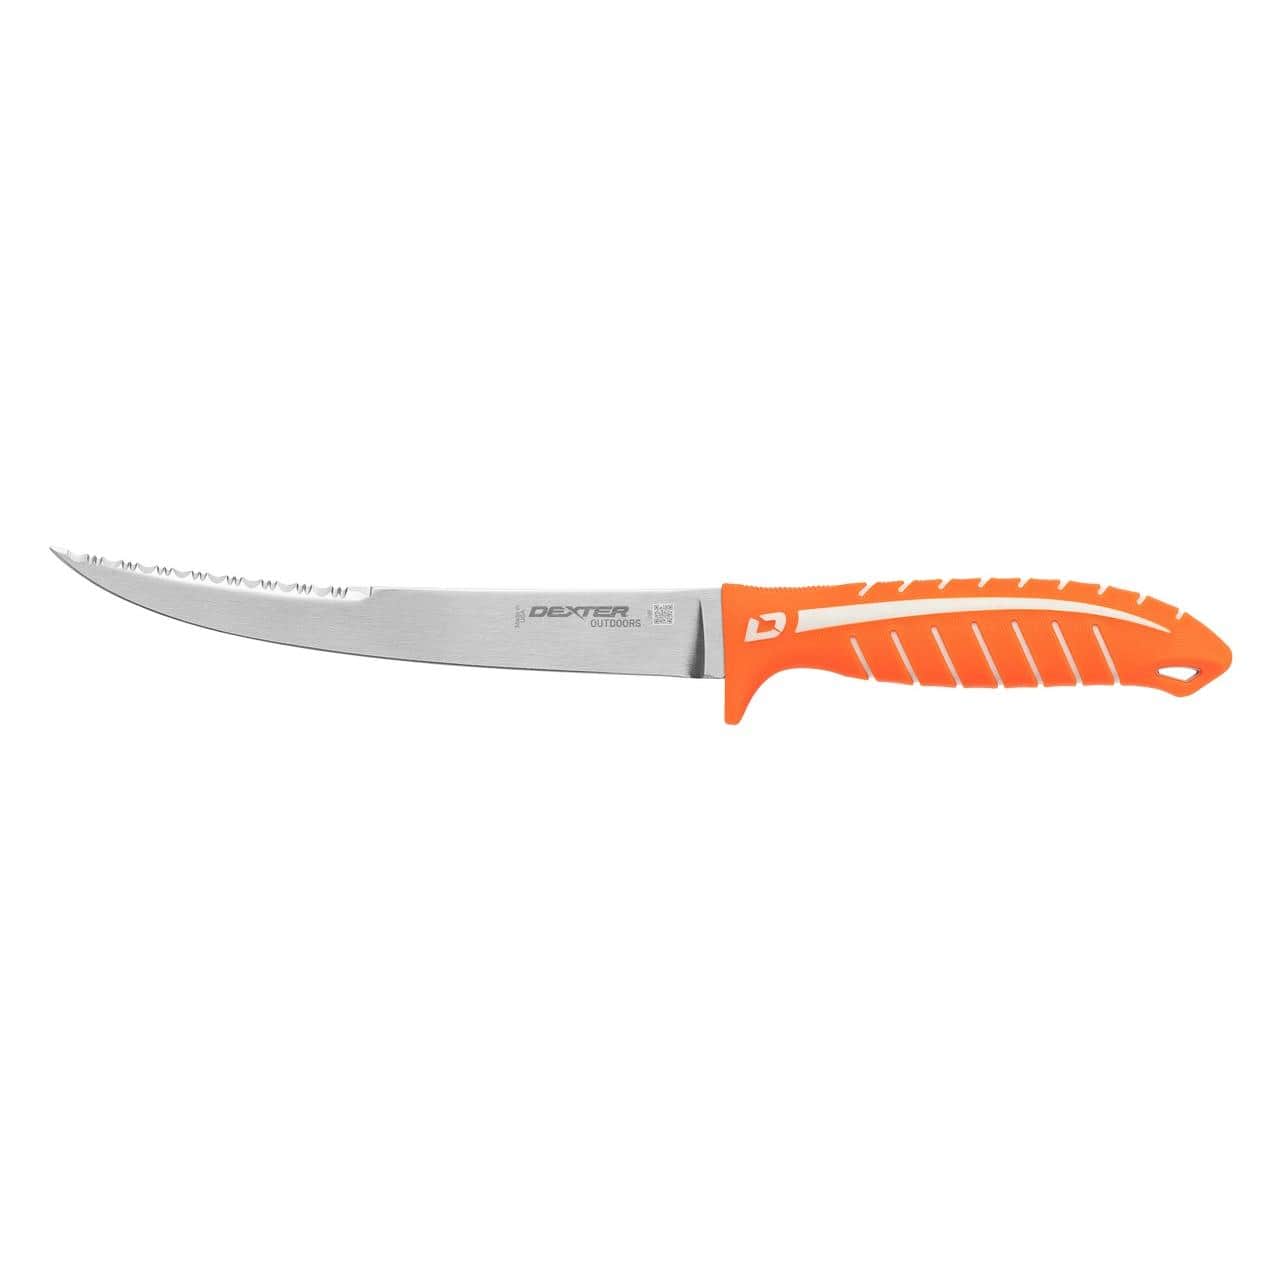  DrQuality Professional Fishing Knife, Fillet Knife